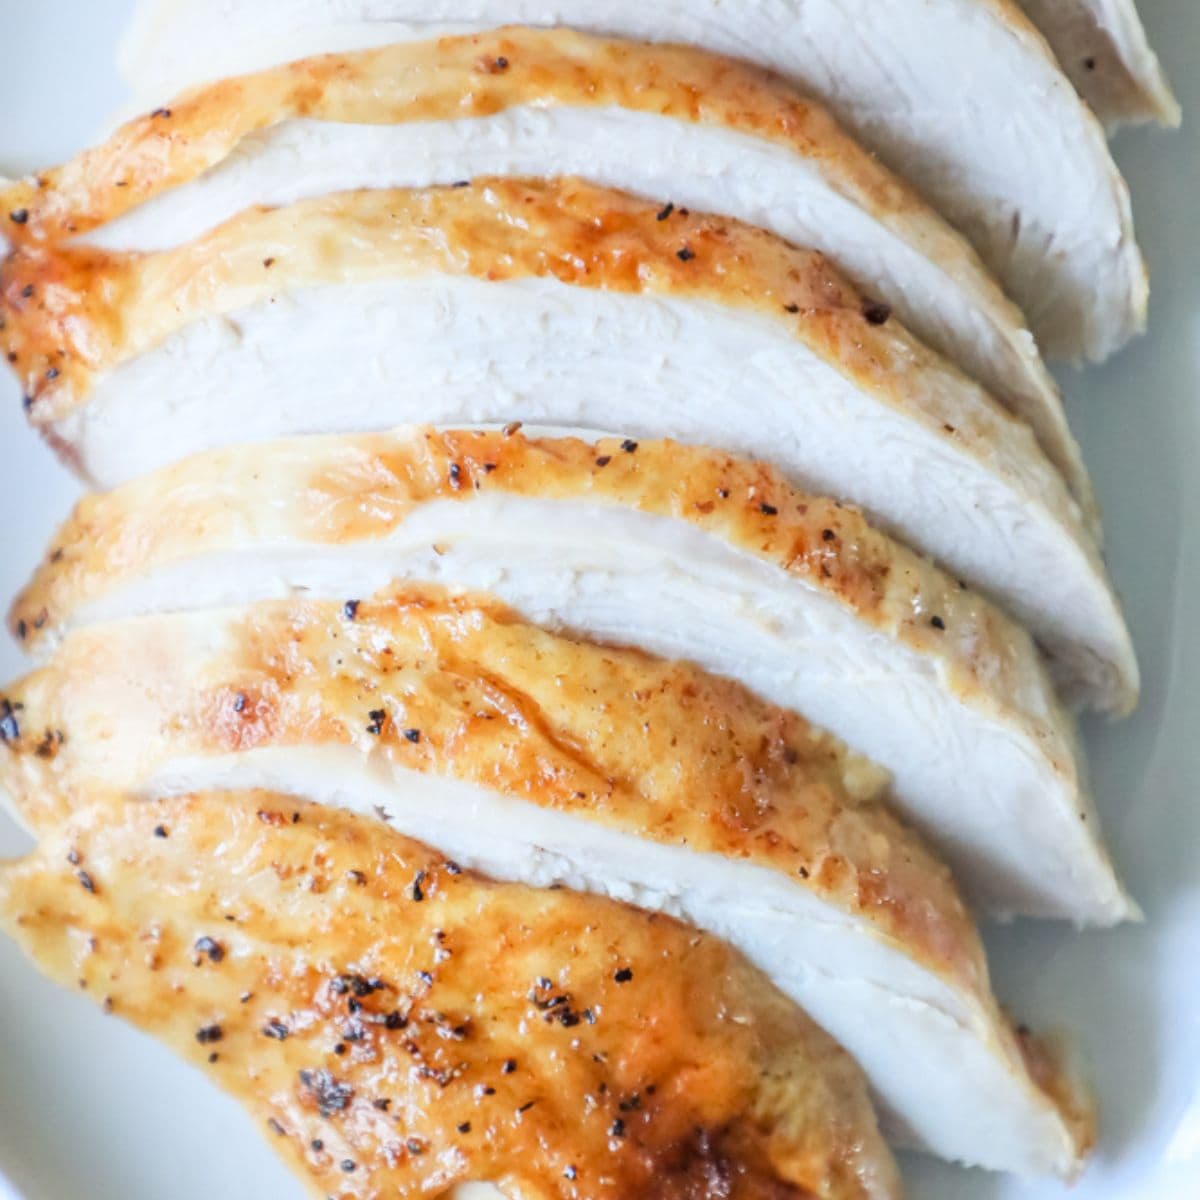 Sliced chicken breasts on a white plate, Oven Baked Chicken Breasts.